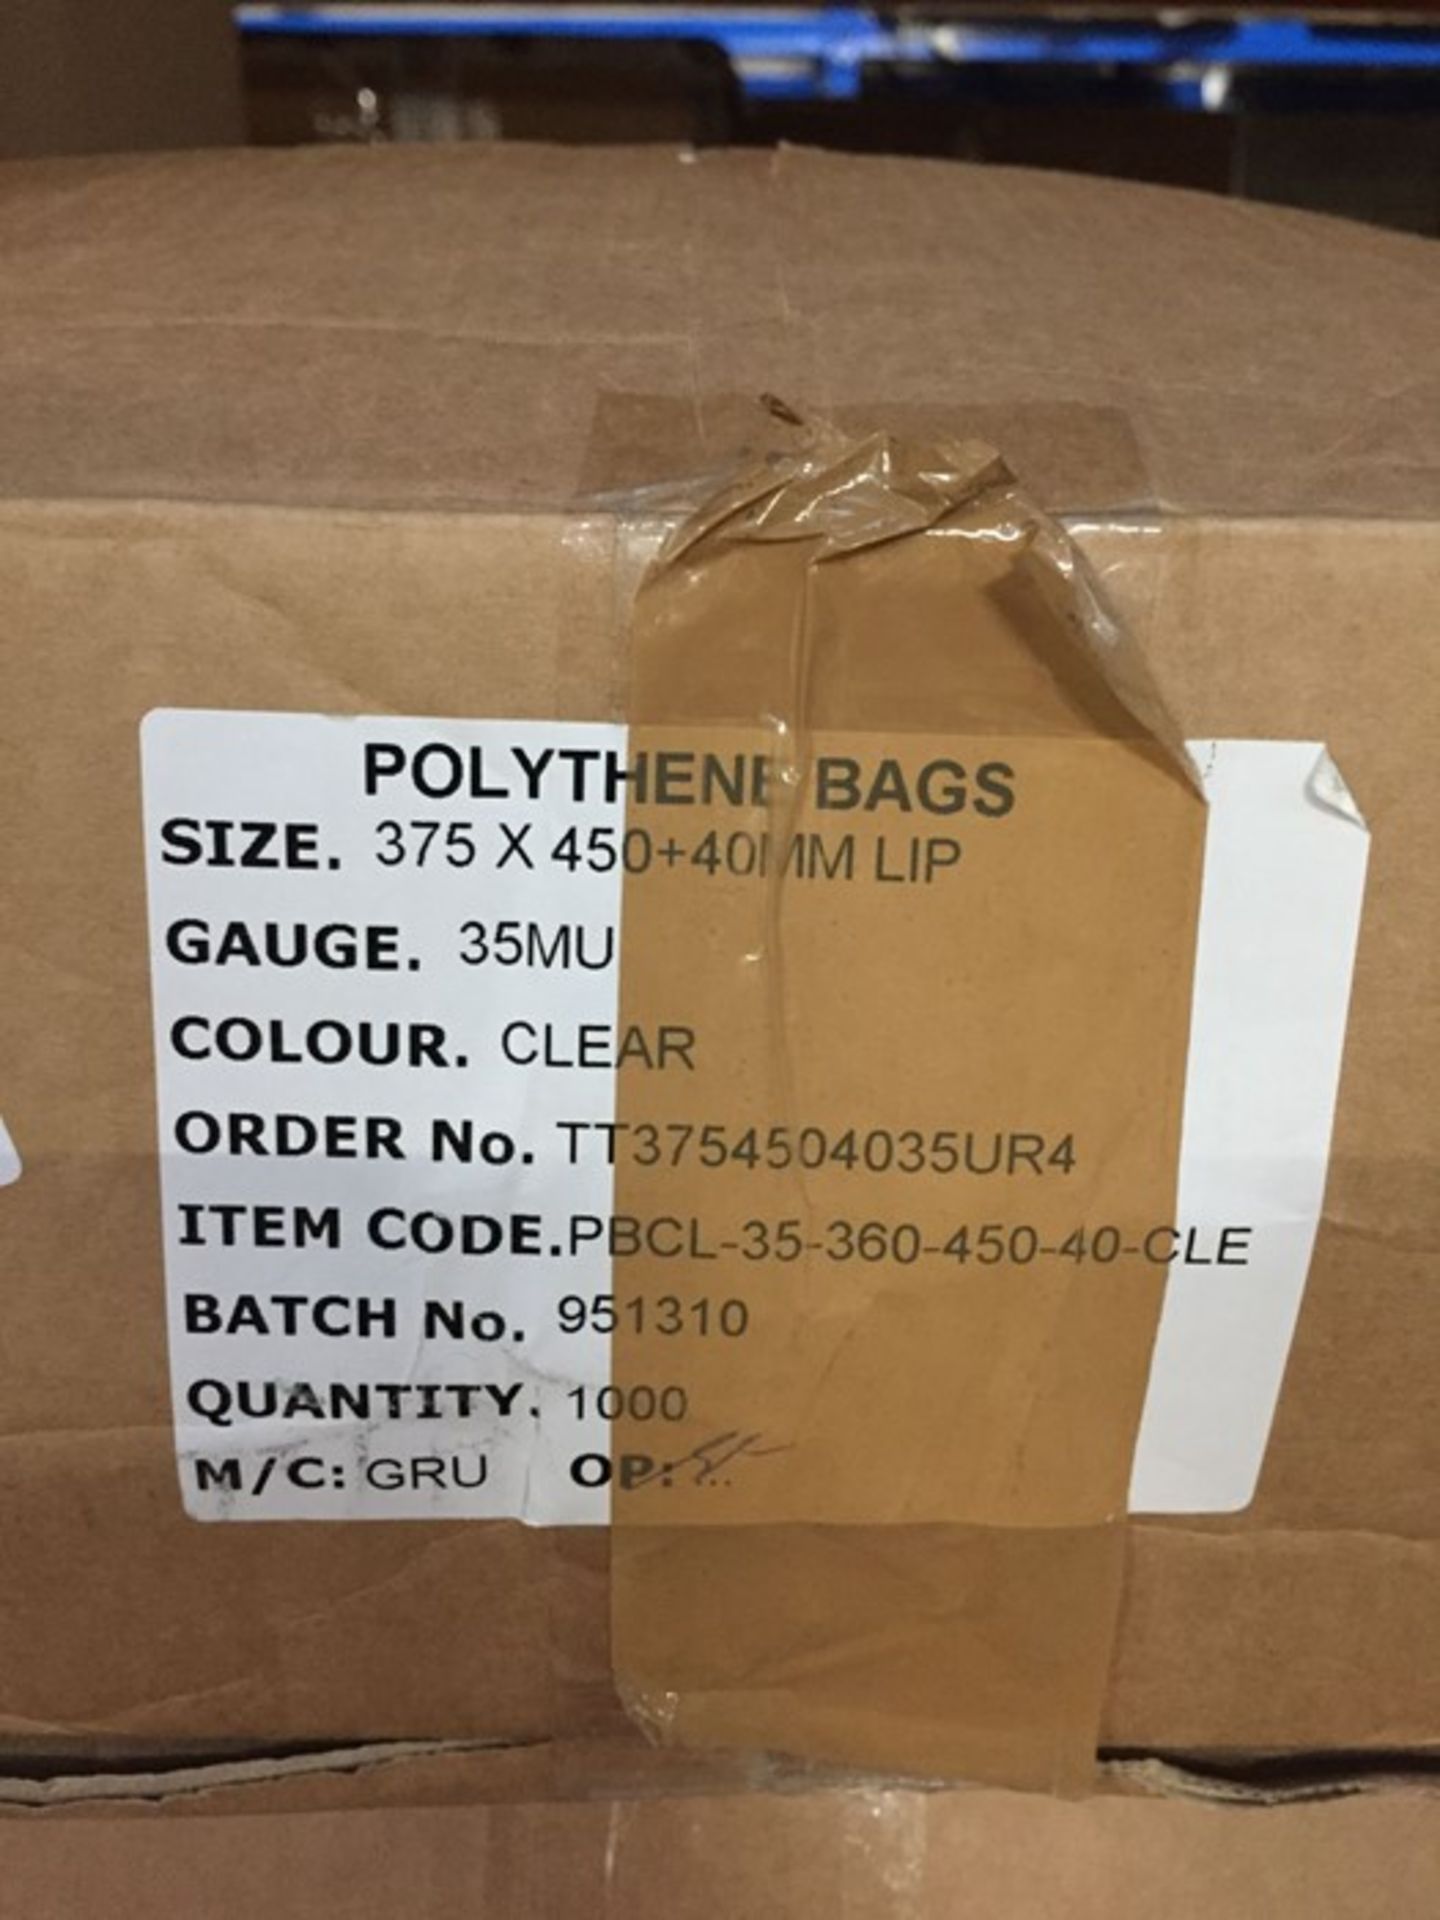 1 LOT TO CONTAIN A BOX OF 1000 SEALABLE CLEAR POLYTHENE BAGS, 375 X 450MM WITH 40MM LIP - L4